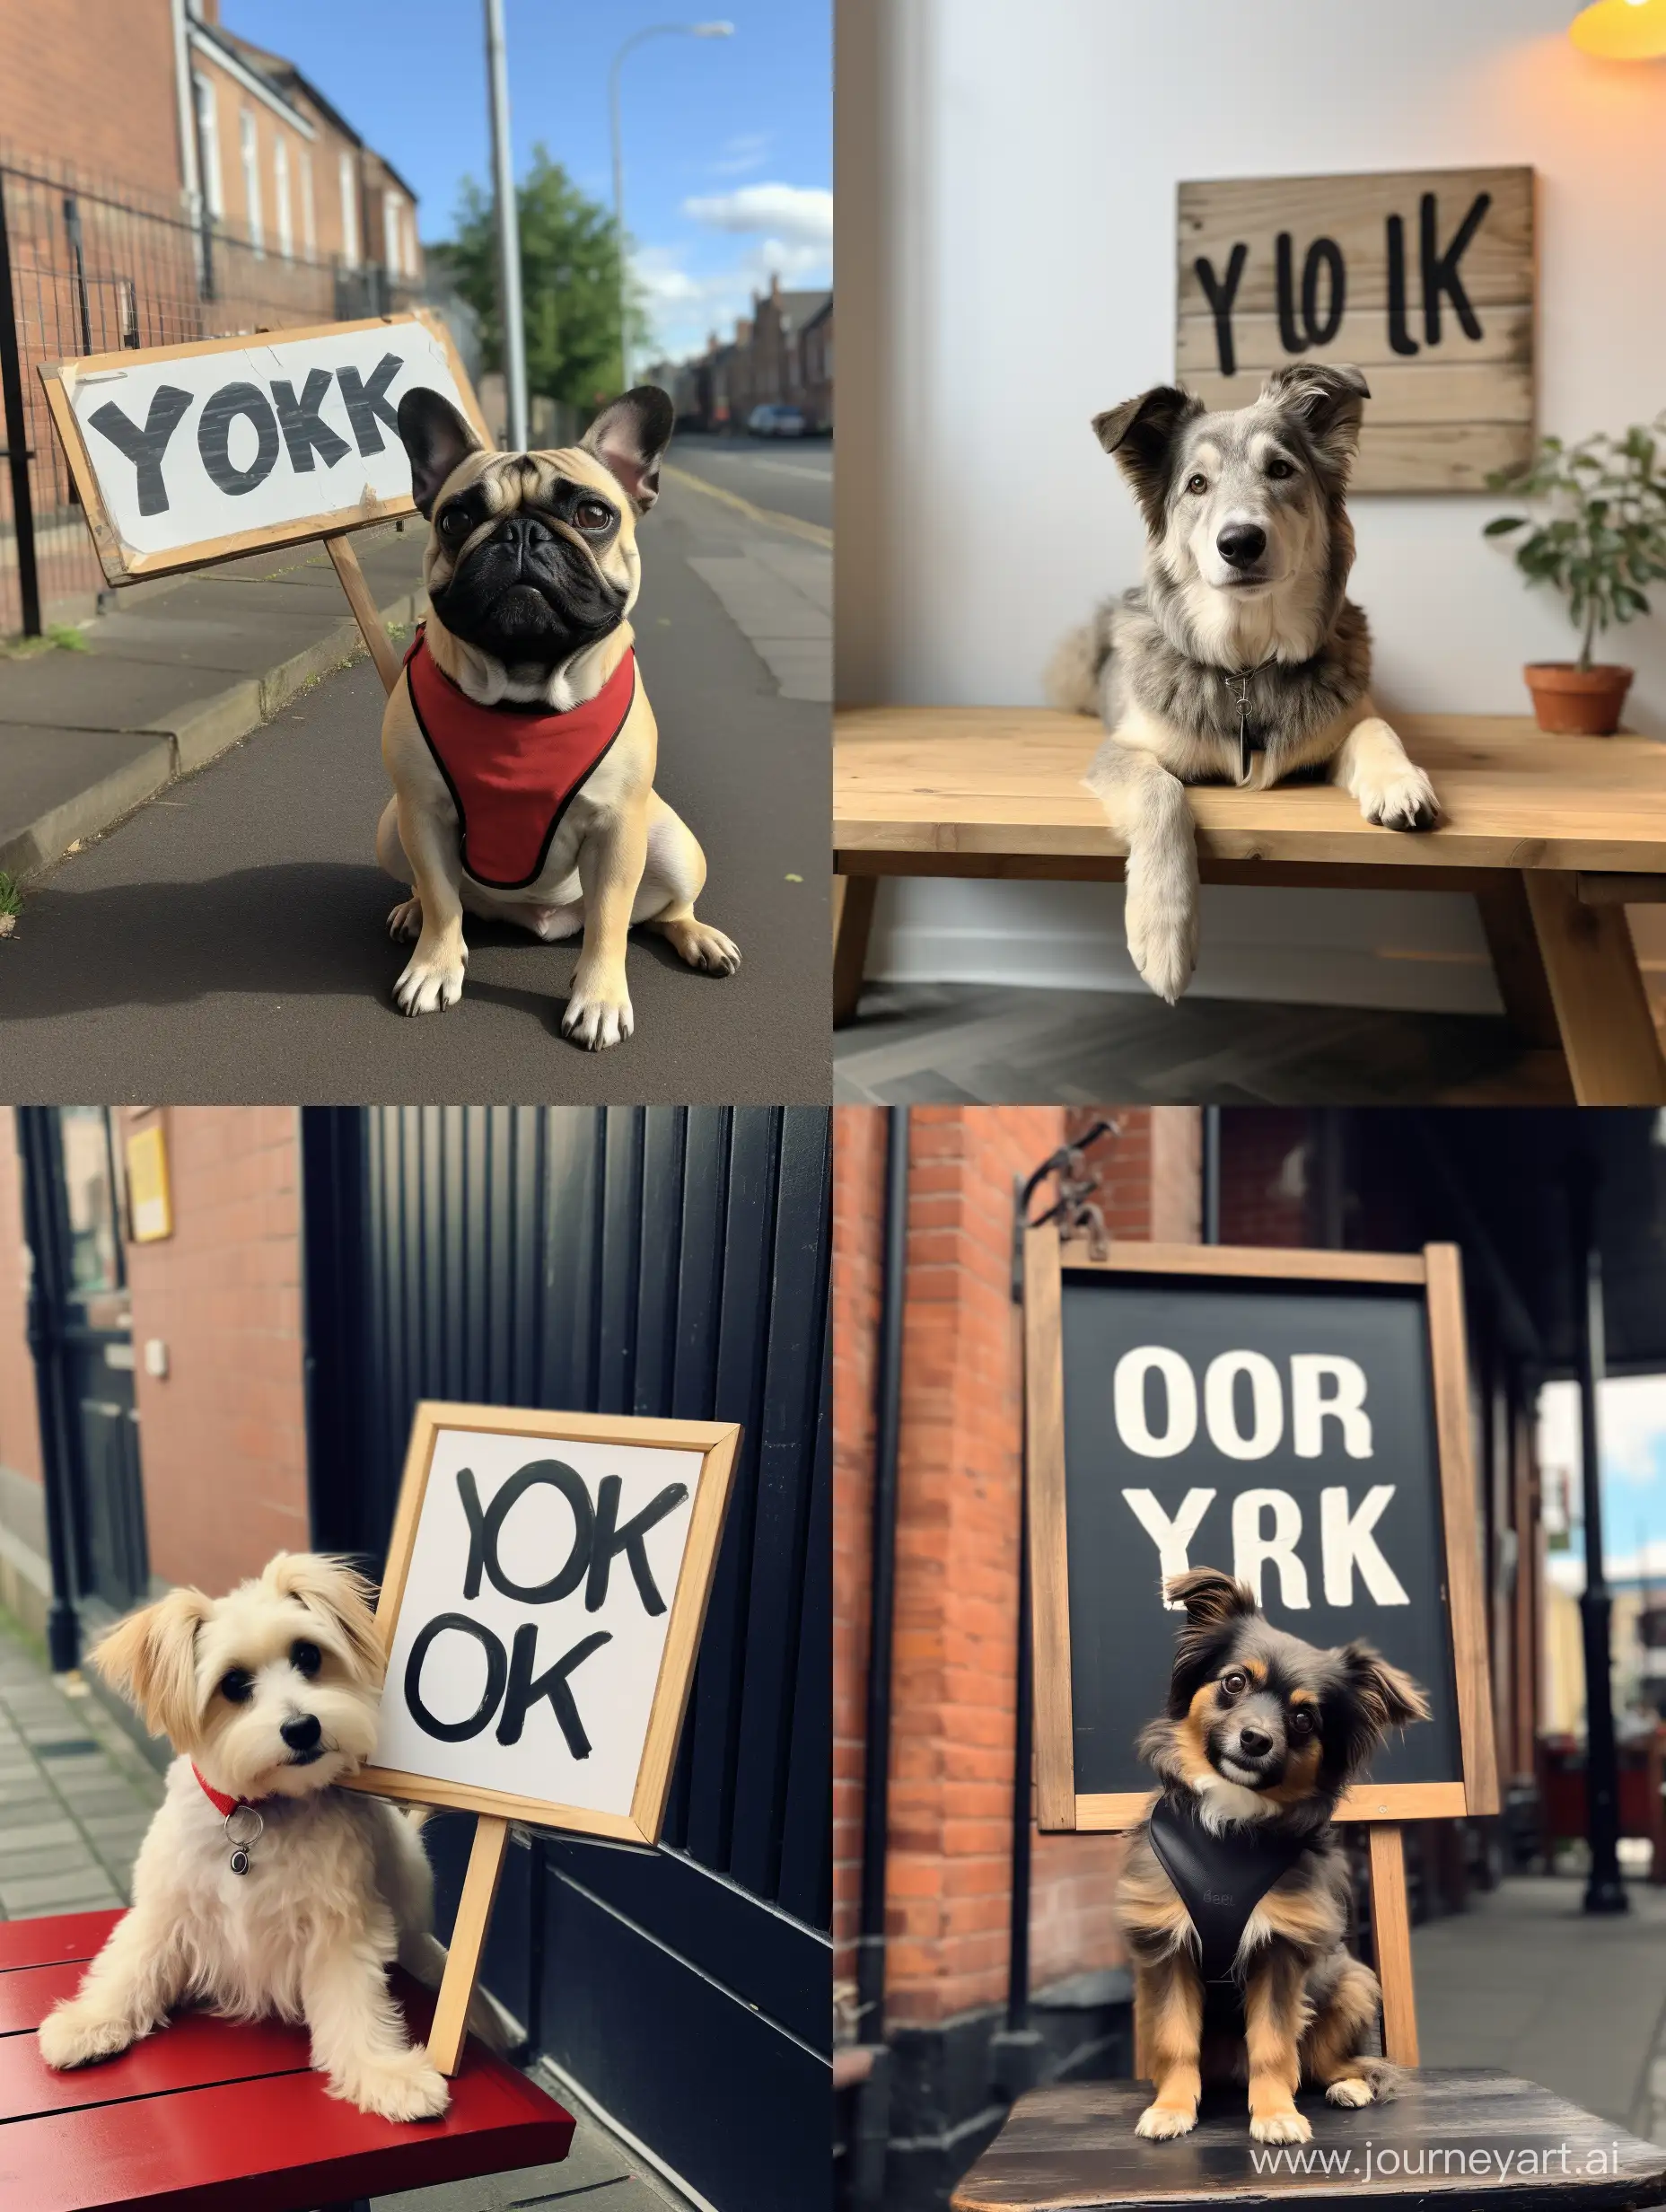 A dog with a sign that reads "Are you ok?"